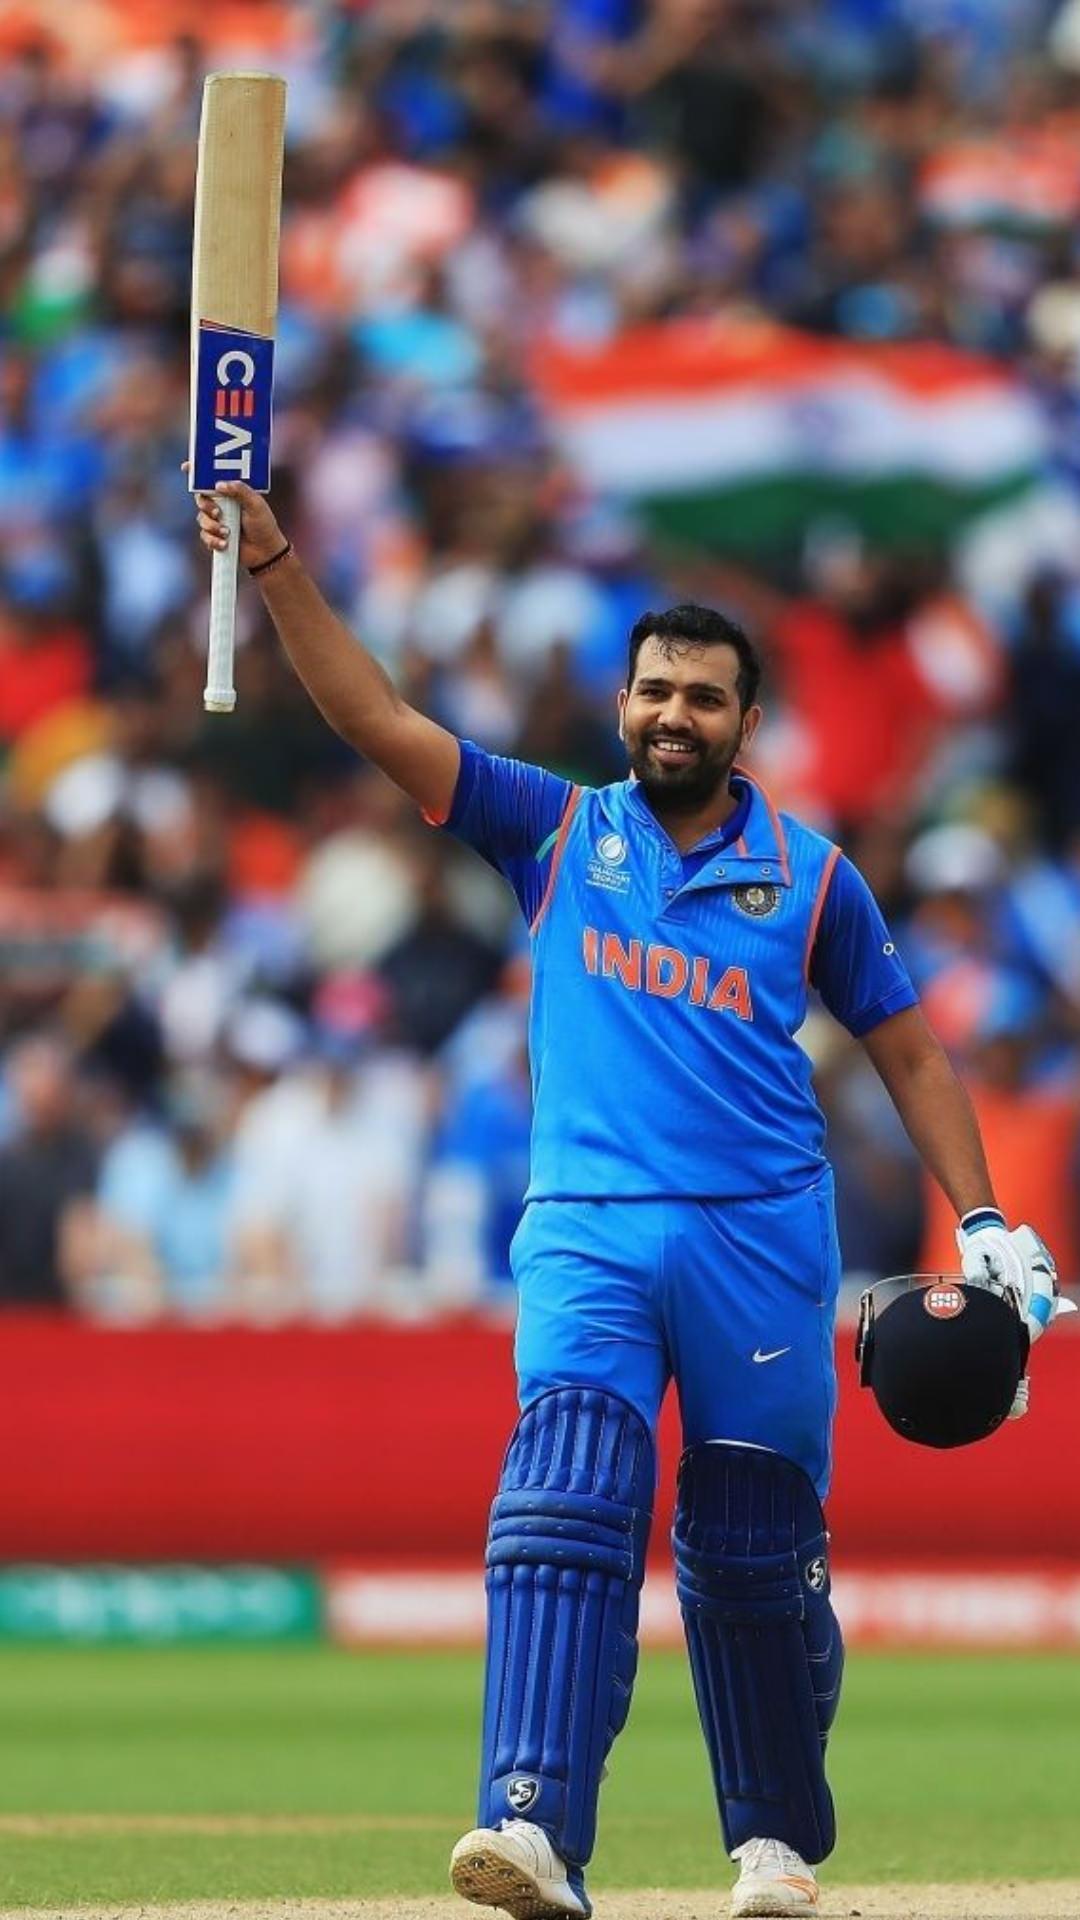 Featured image of post Rohit Sharma Photo Download Wallpaper Rohit sharma hd wallpaper rohit sharma latest 2016 hd wallpaper collection rohit sharma indian cricket team most popular player rohit sharma hd wallpapers beautiful images animal cricketer worlds bollywood and hollywood actresses hd photos pictures and high quality hd pics wwe sport car